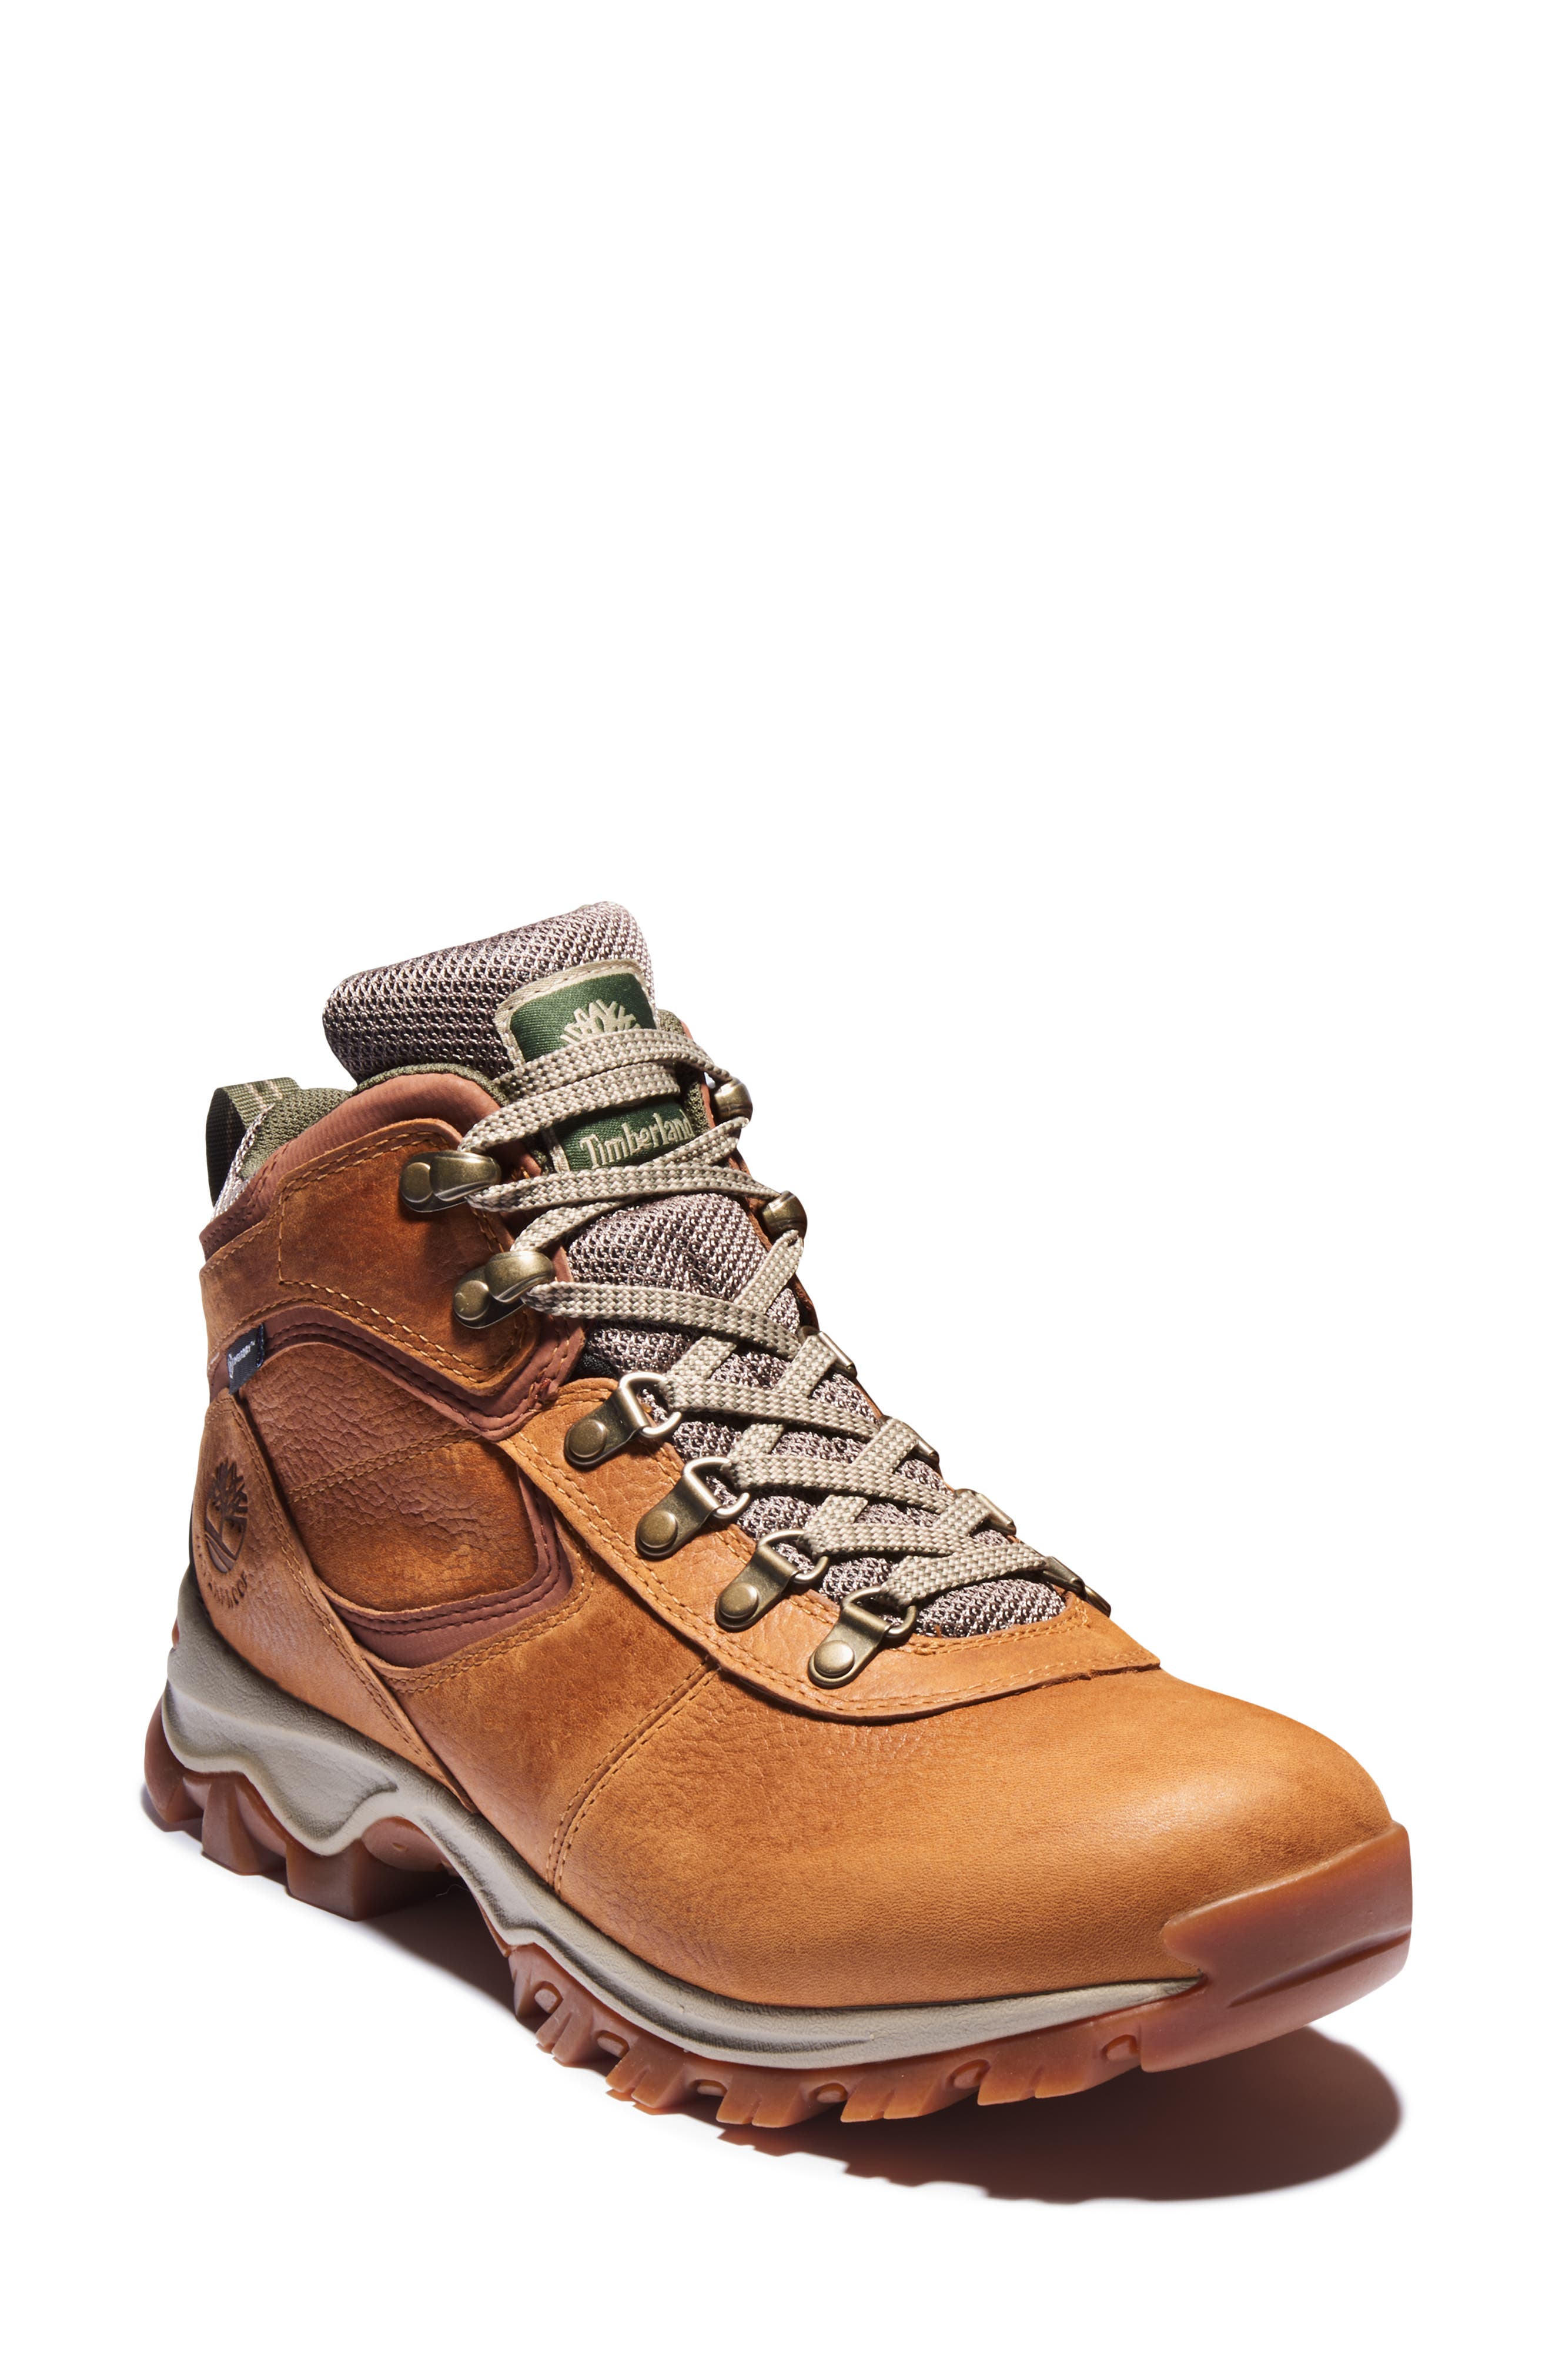 nordstrom men's shoes timberland